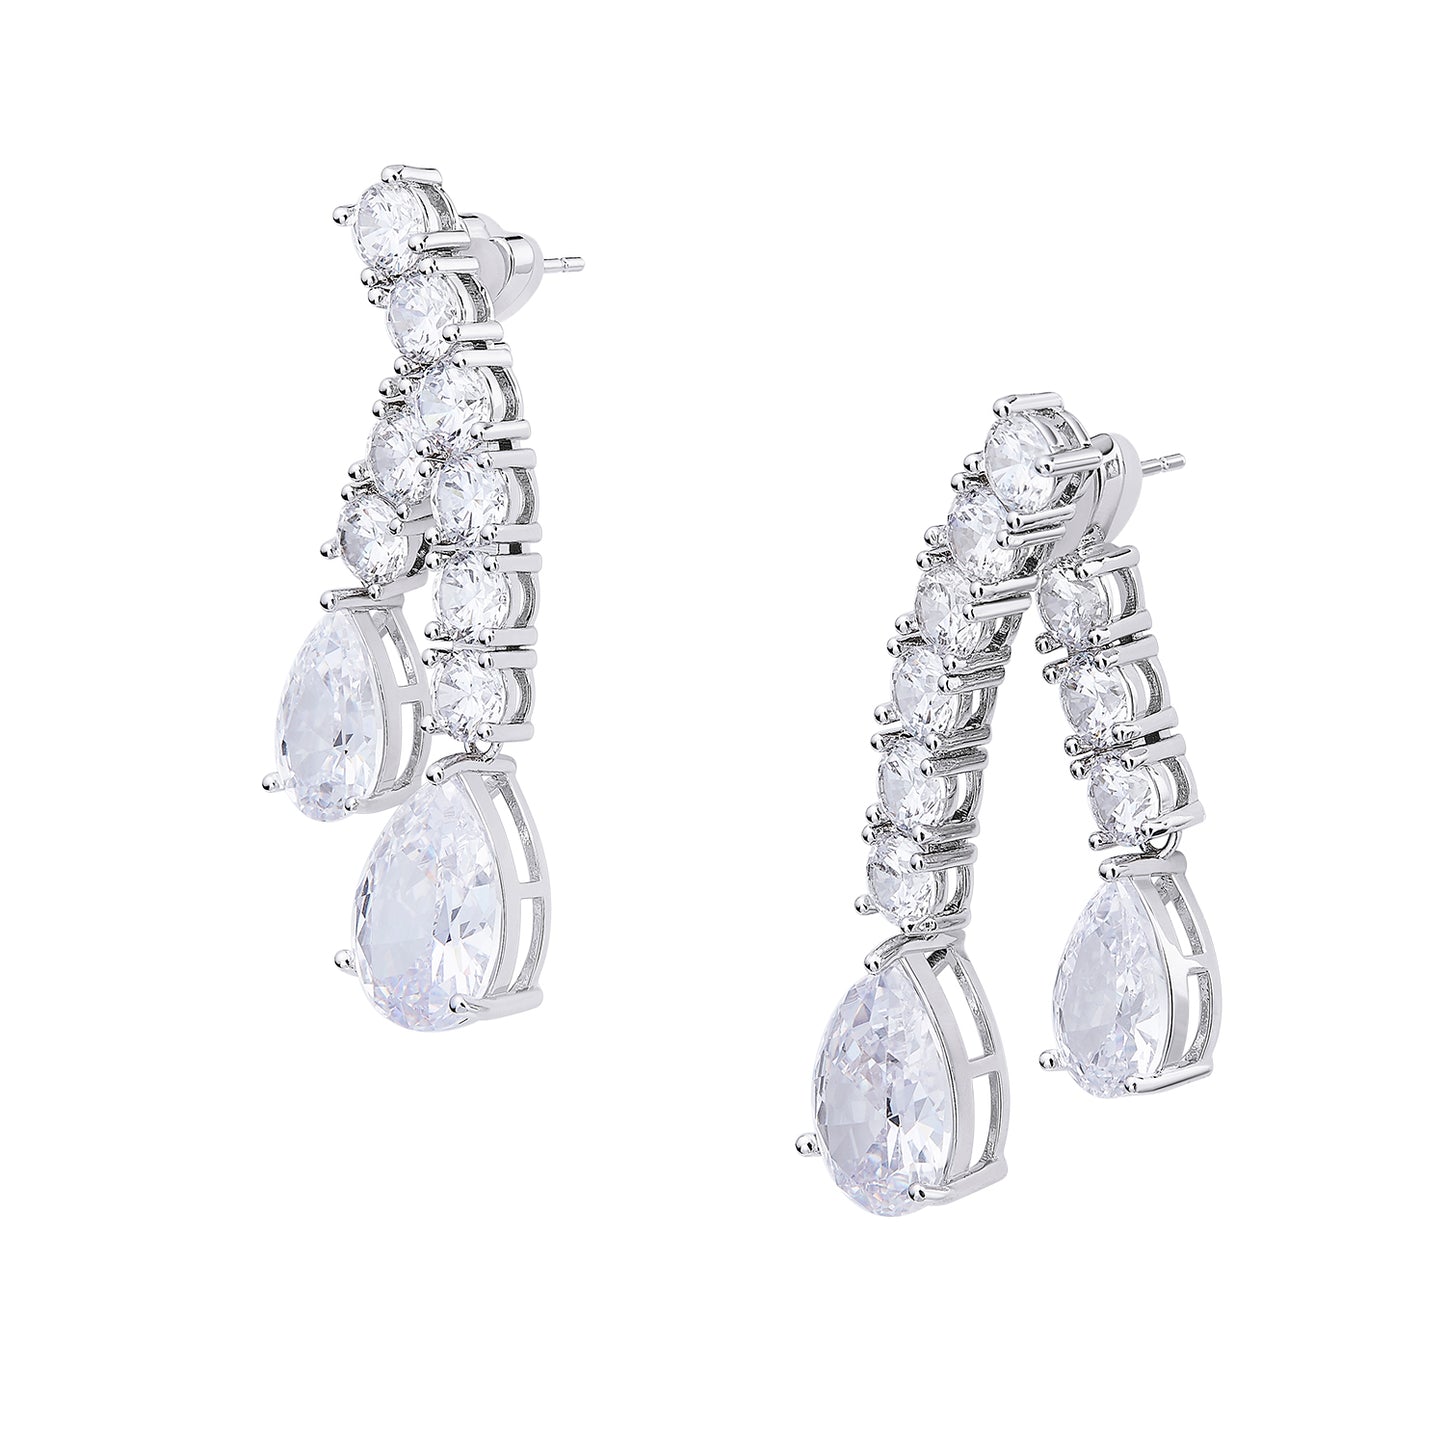 silver diamonds with a drip Earrings